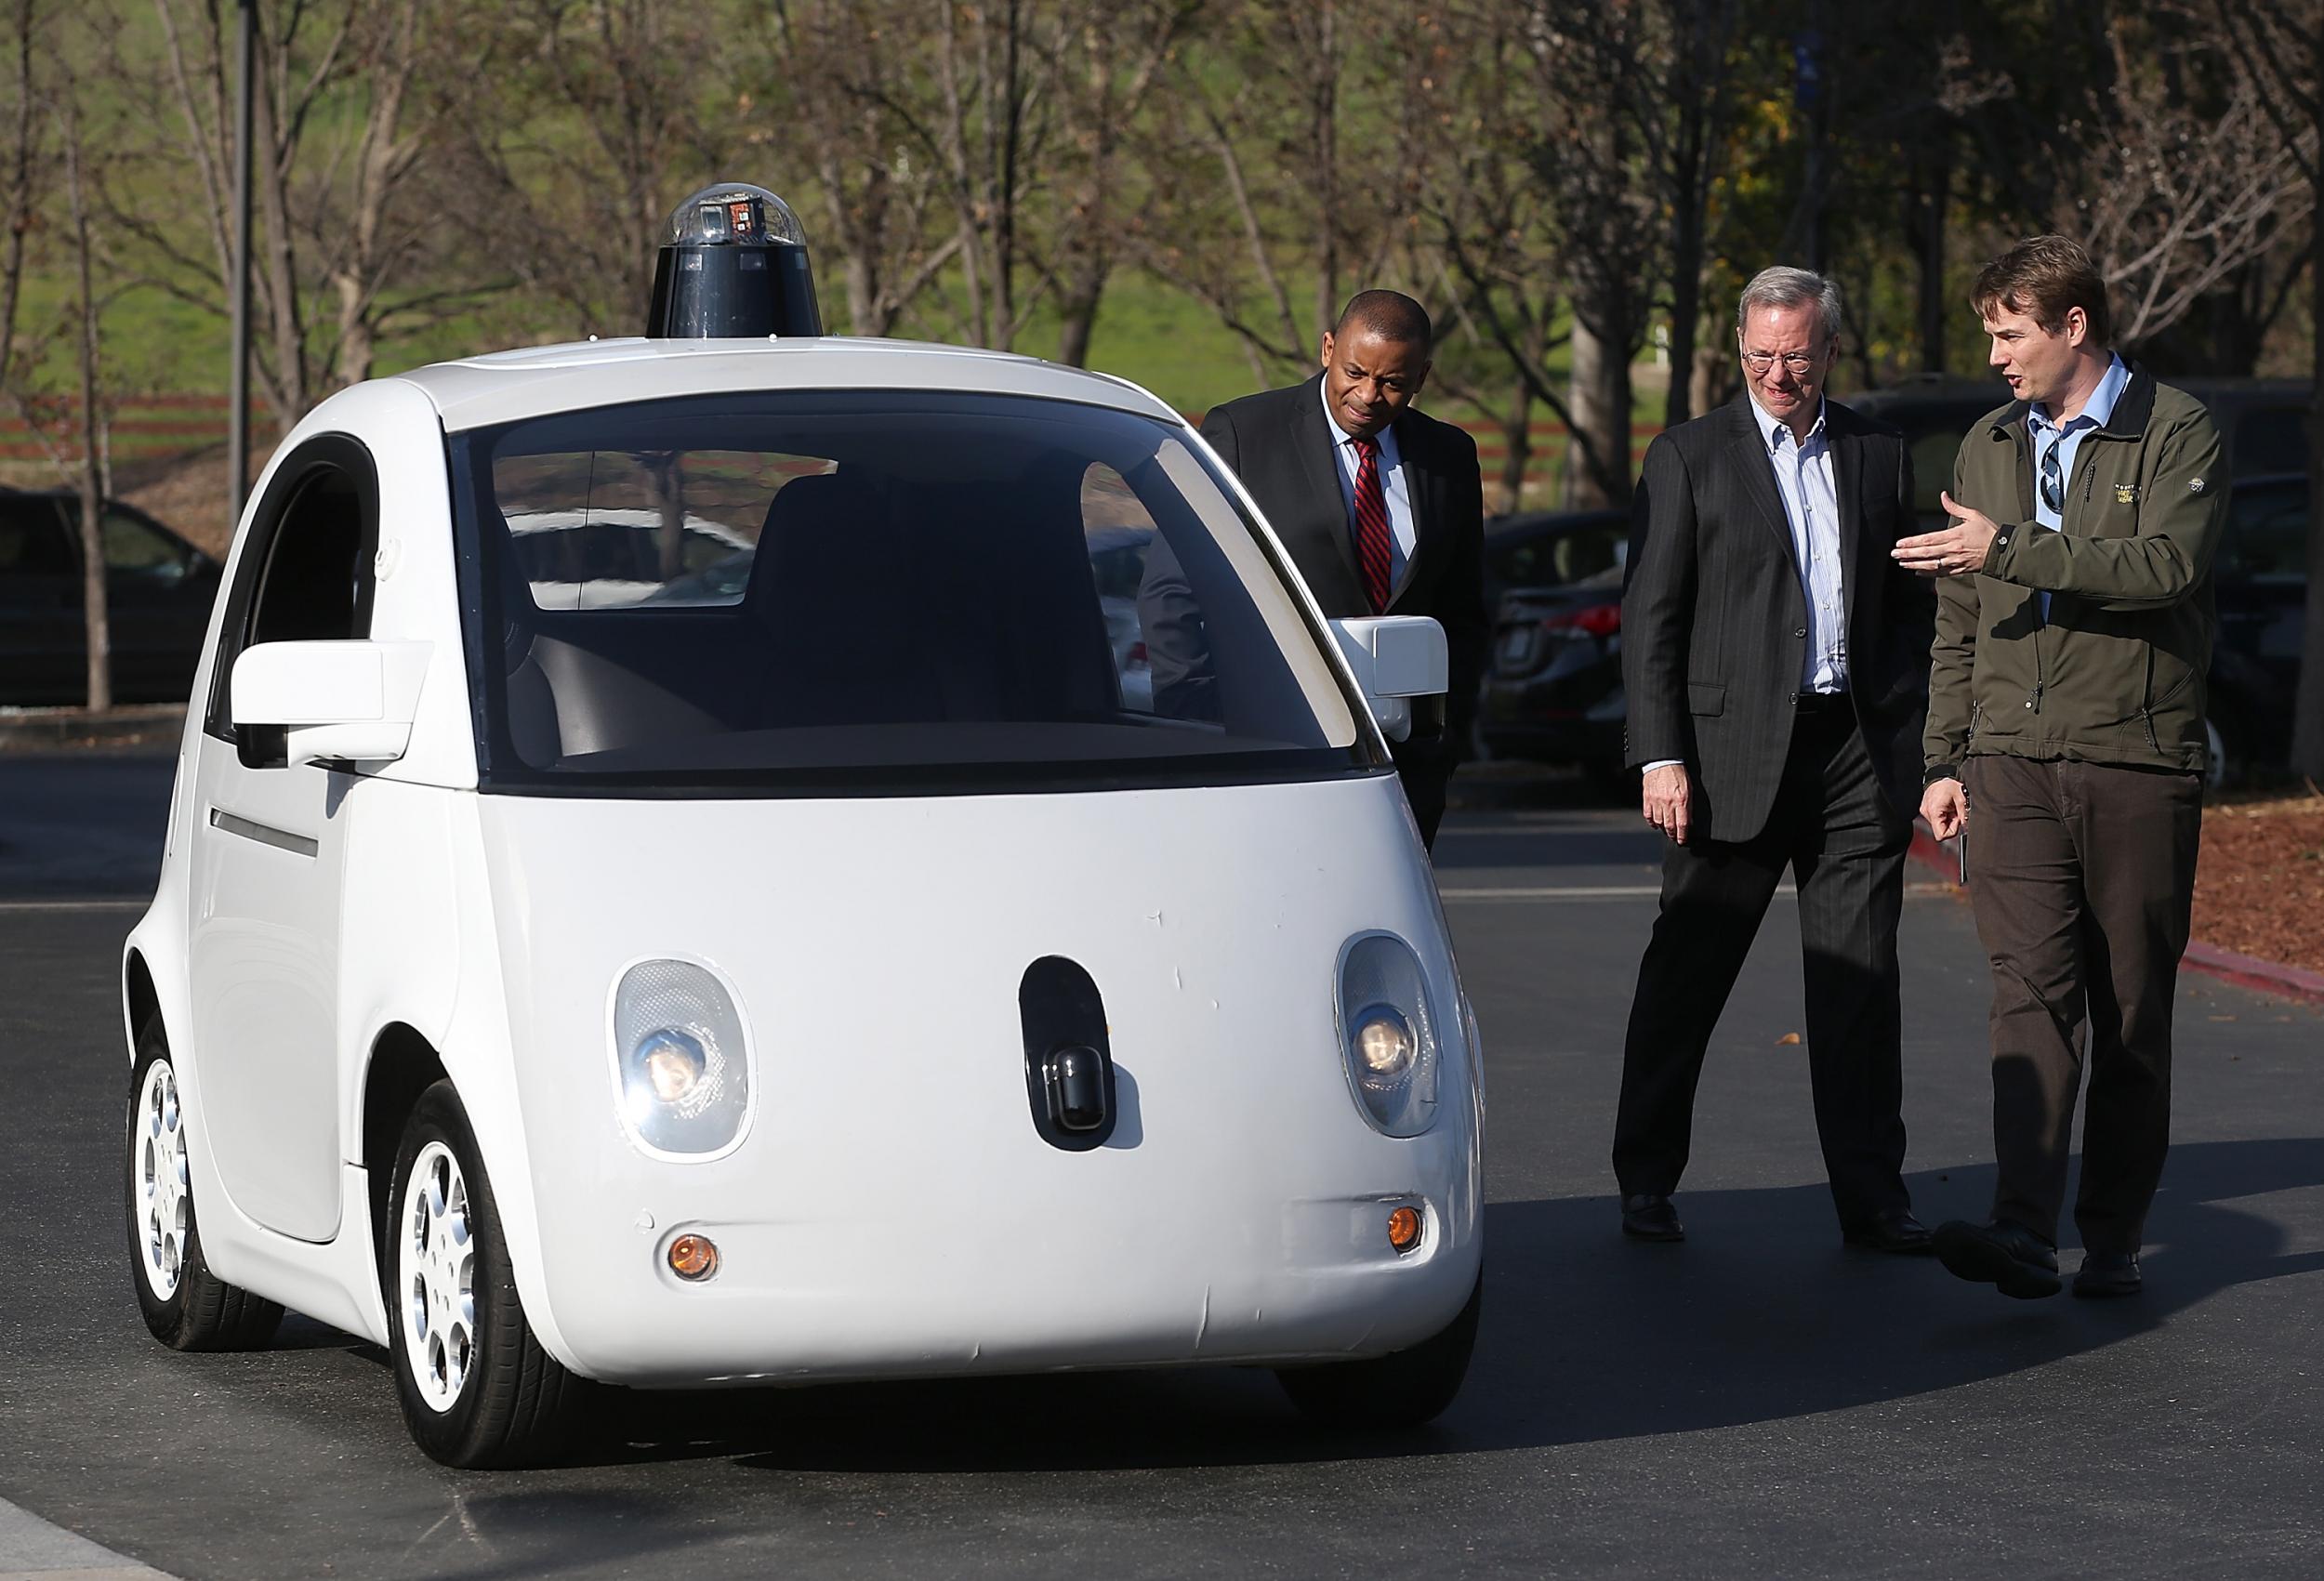 Chris Urmson, the head of Google's self-driving car project, shows one of the prototypes to US Transportation Secretary Anthony Foxx